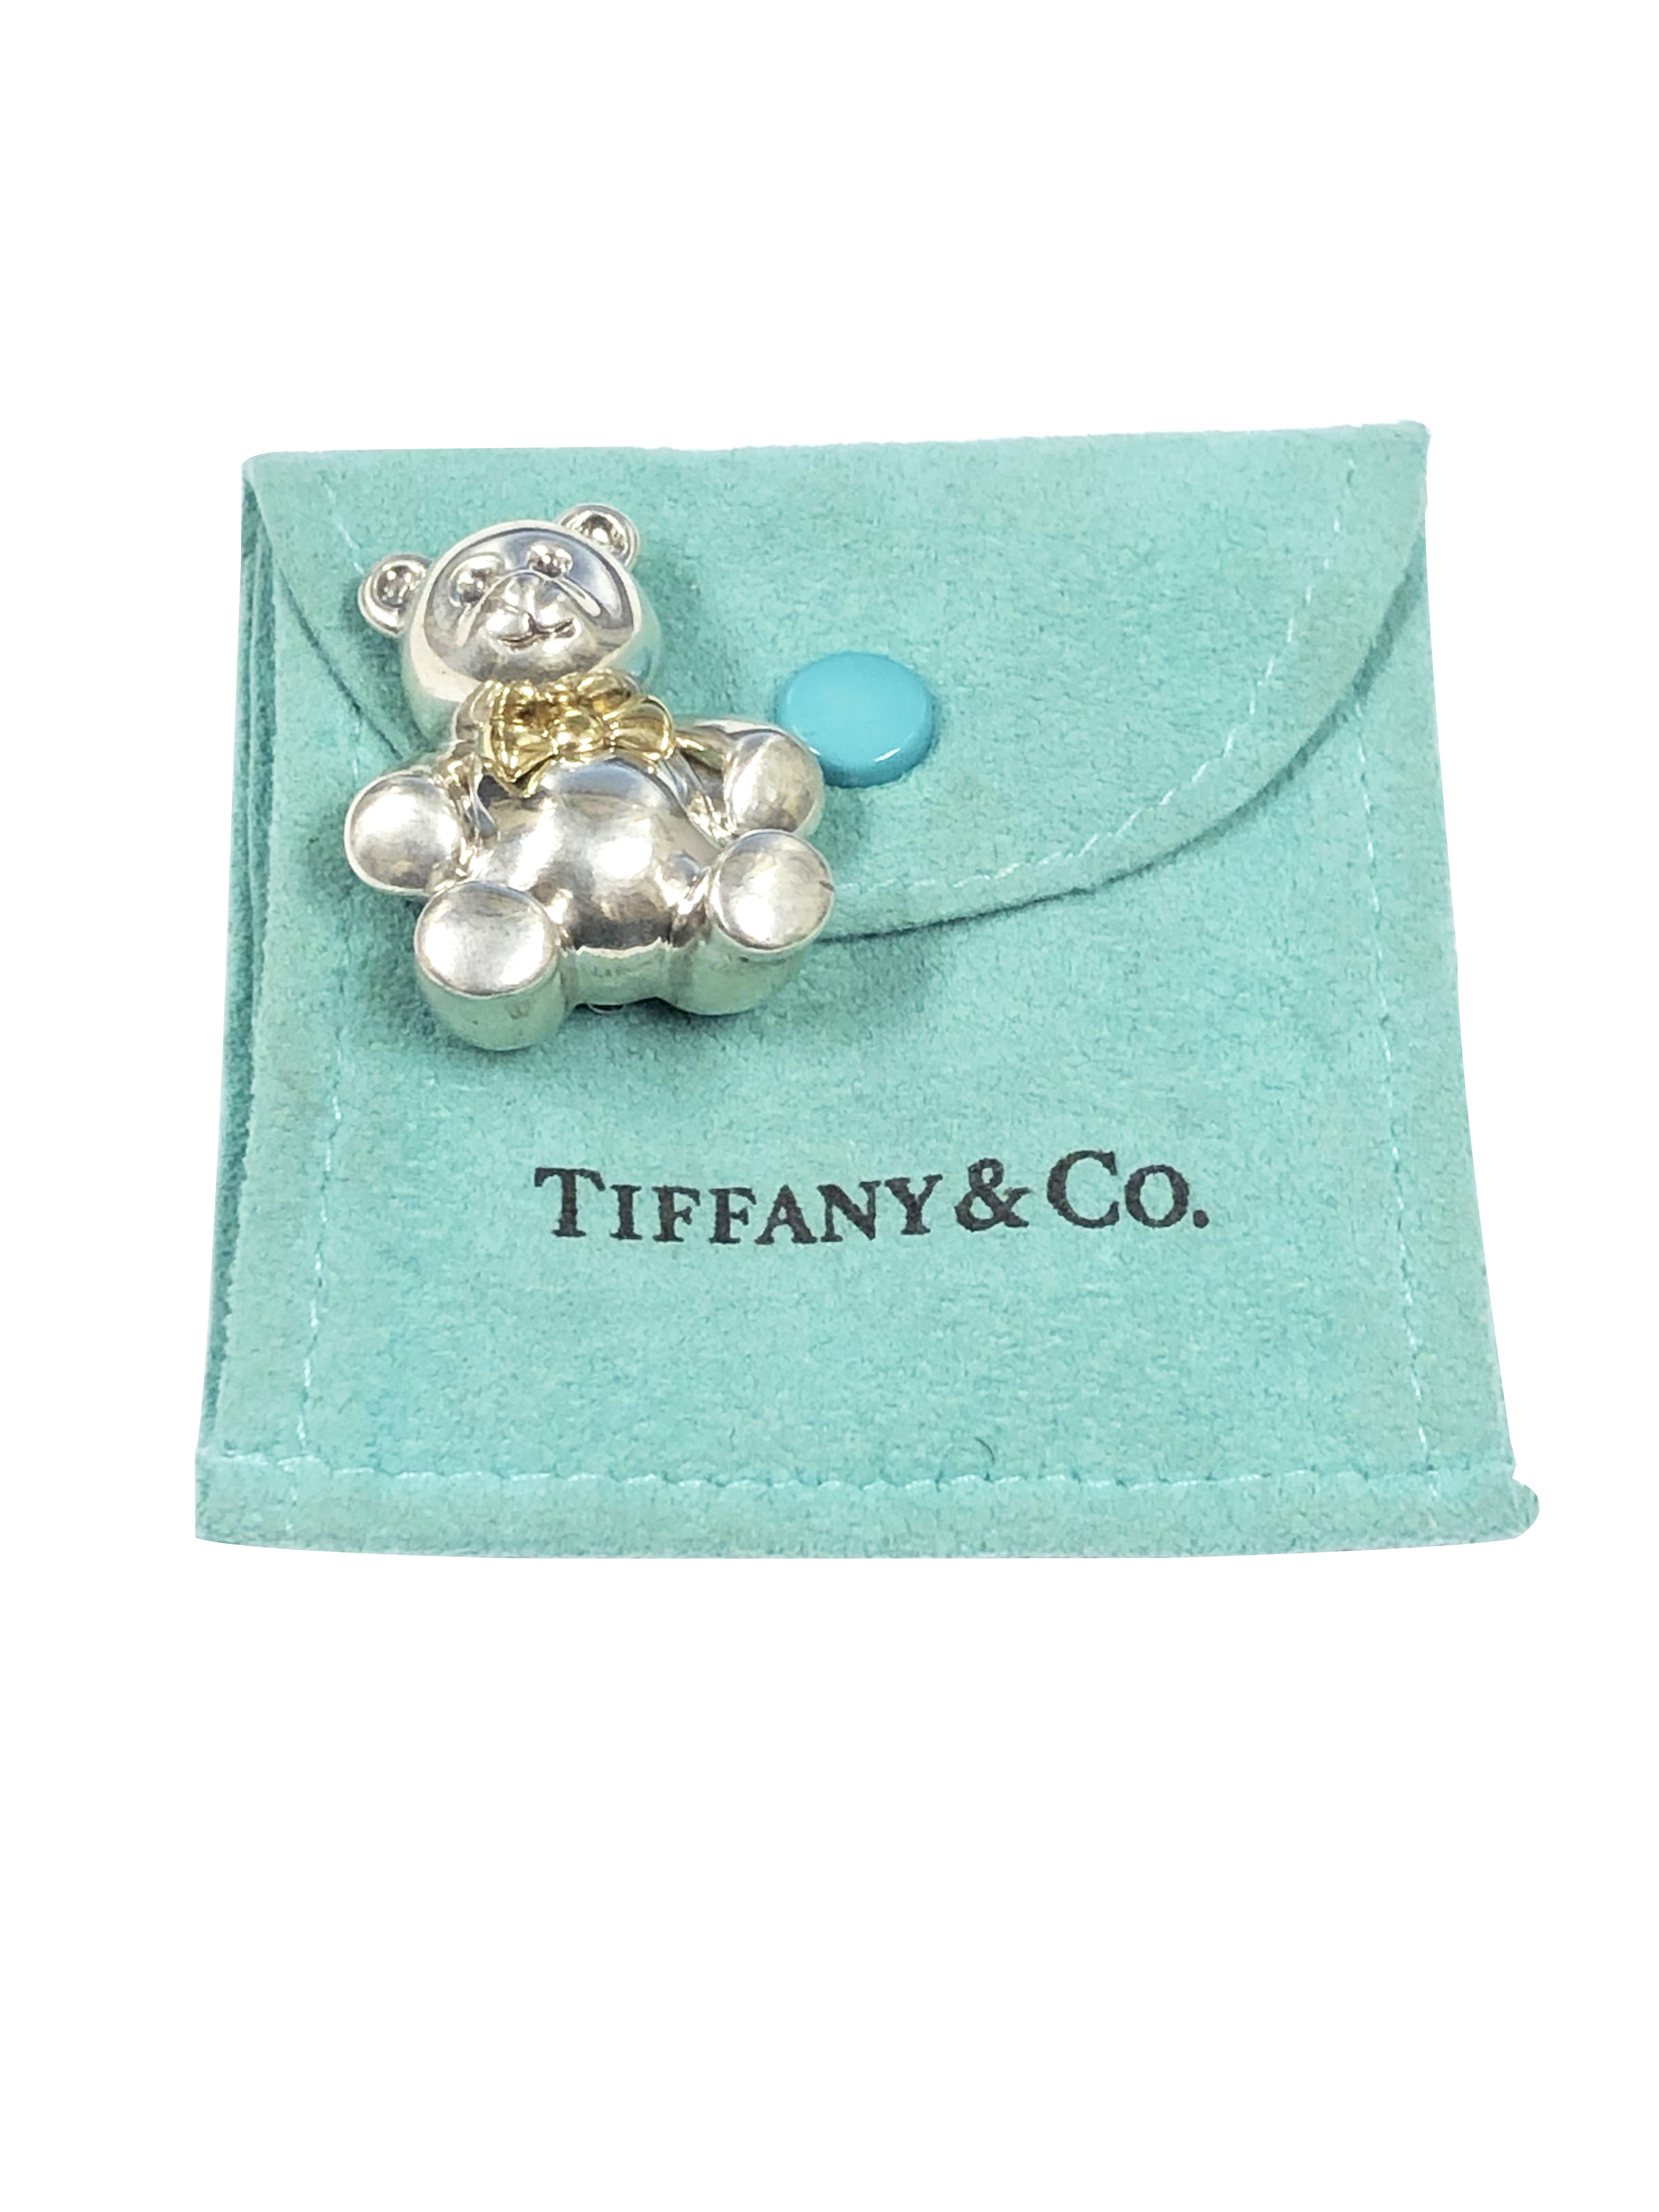 Circa 1990s Tiffany & Company Sterling Silver Whimsical Teddy Bear Brooch with a Yellow gold Bow Tie, measuring 1 3/8 inch in height and 1 inch wide. 